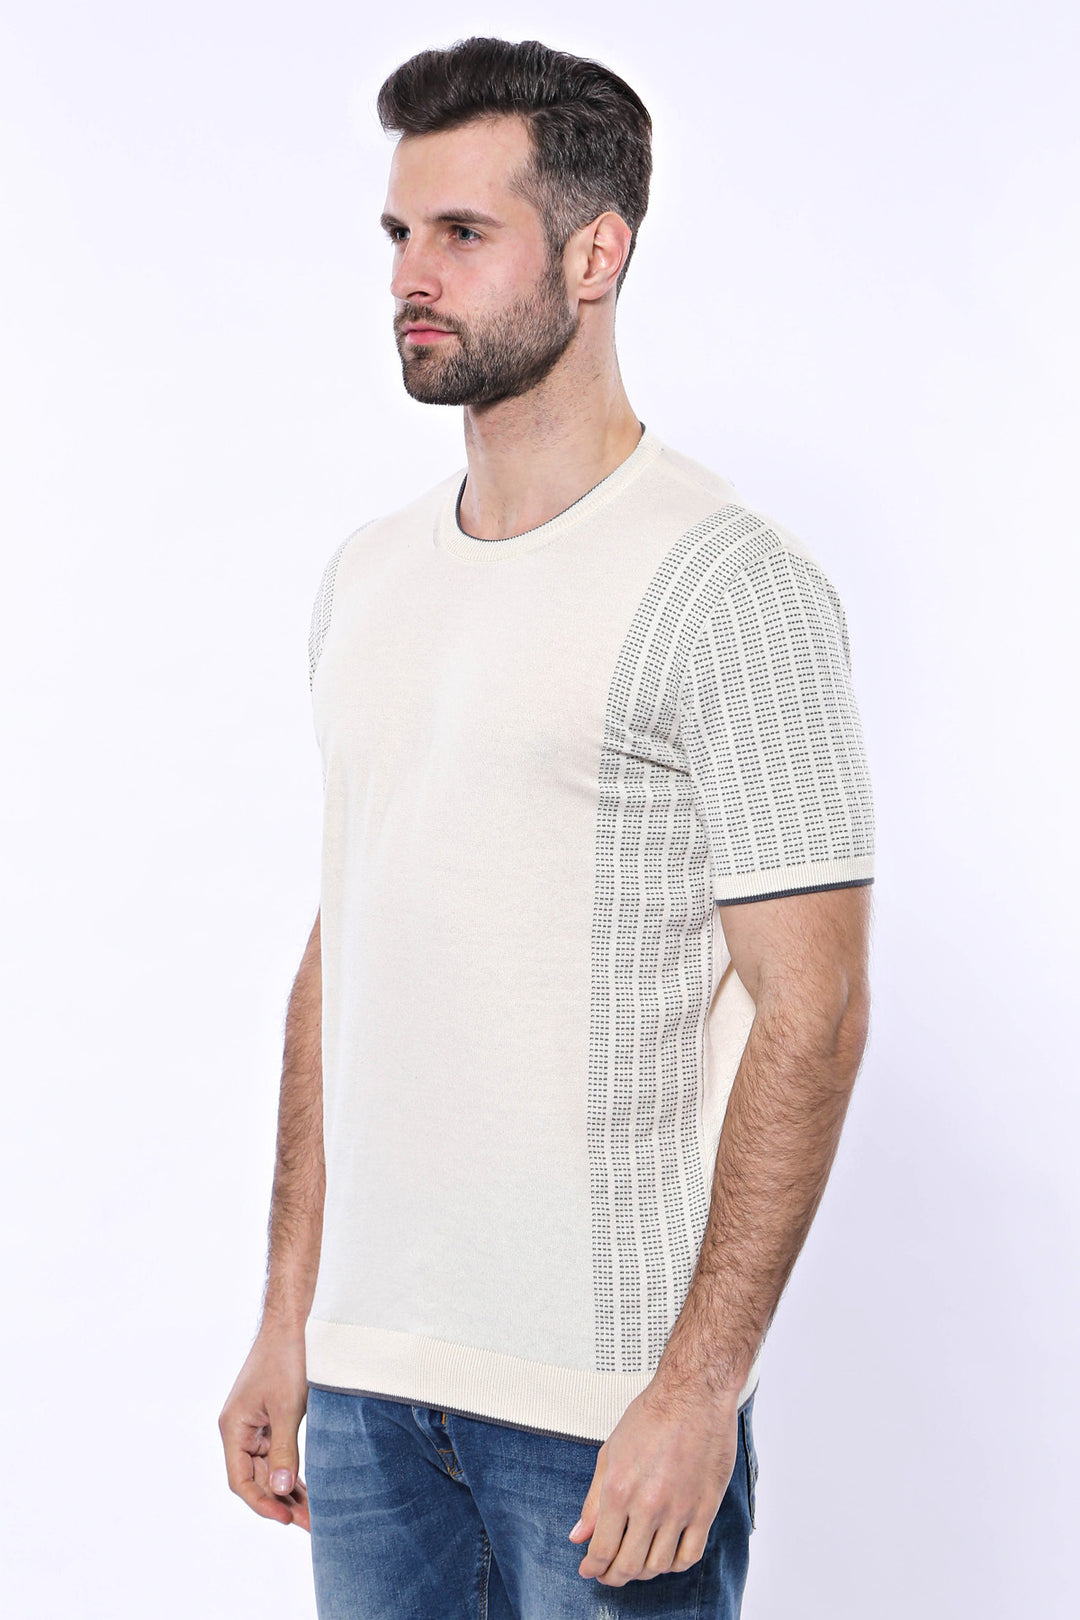 Circle Neck Patterned Cream Knitted T-Shirt - Wessi